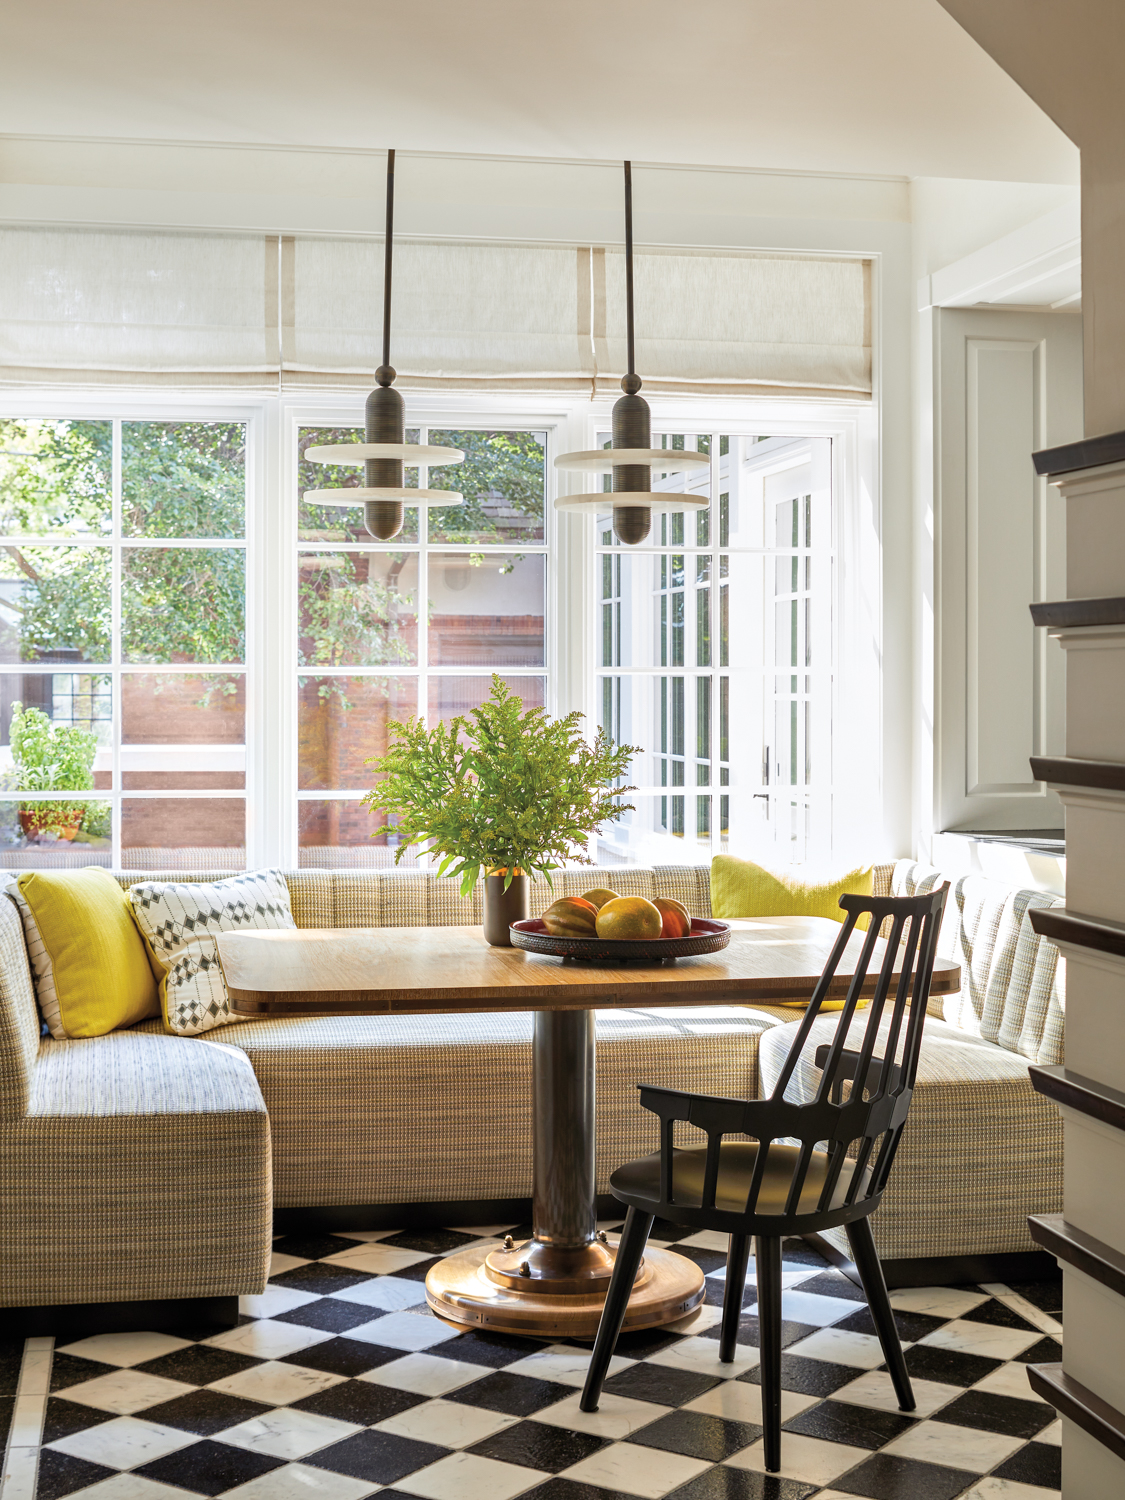 A breakfast nook with banquette...